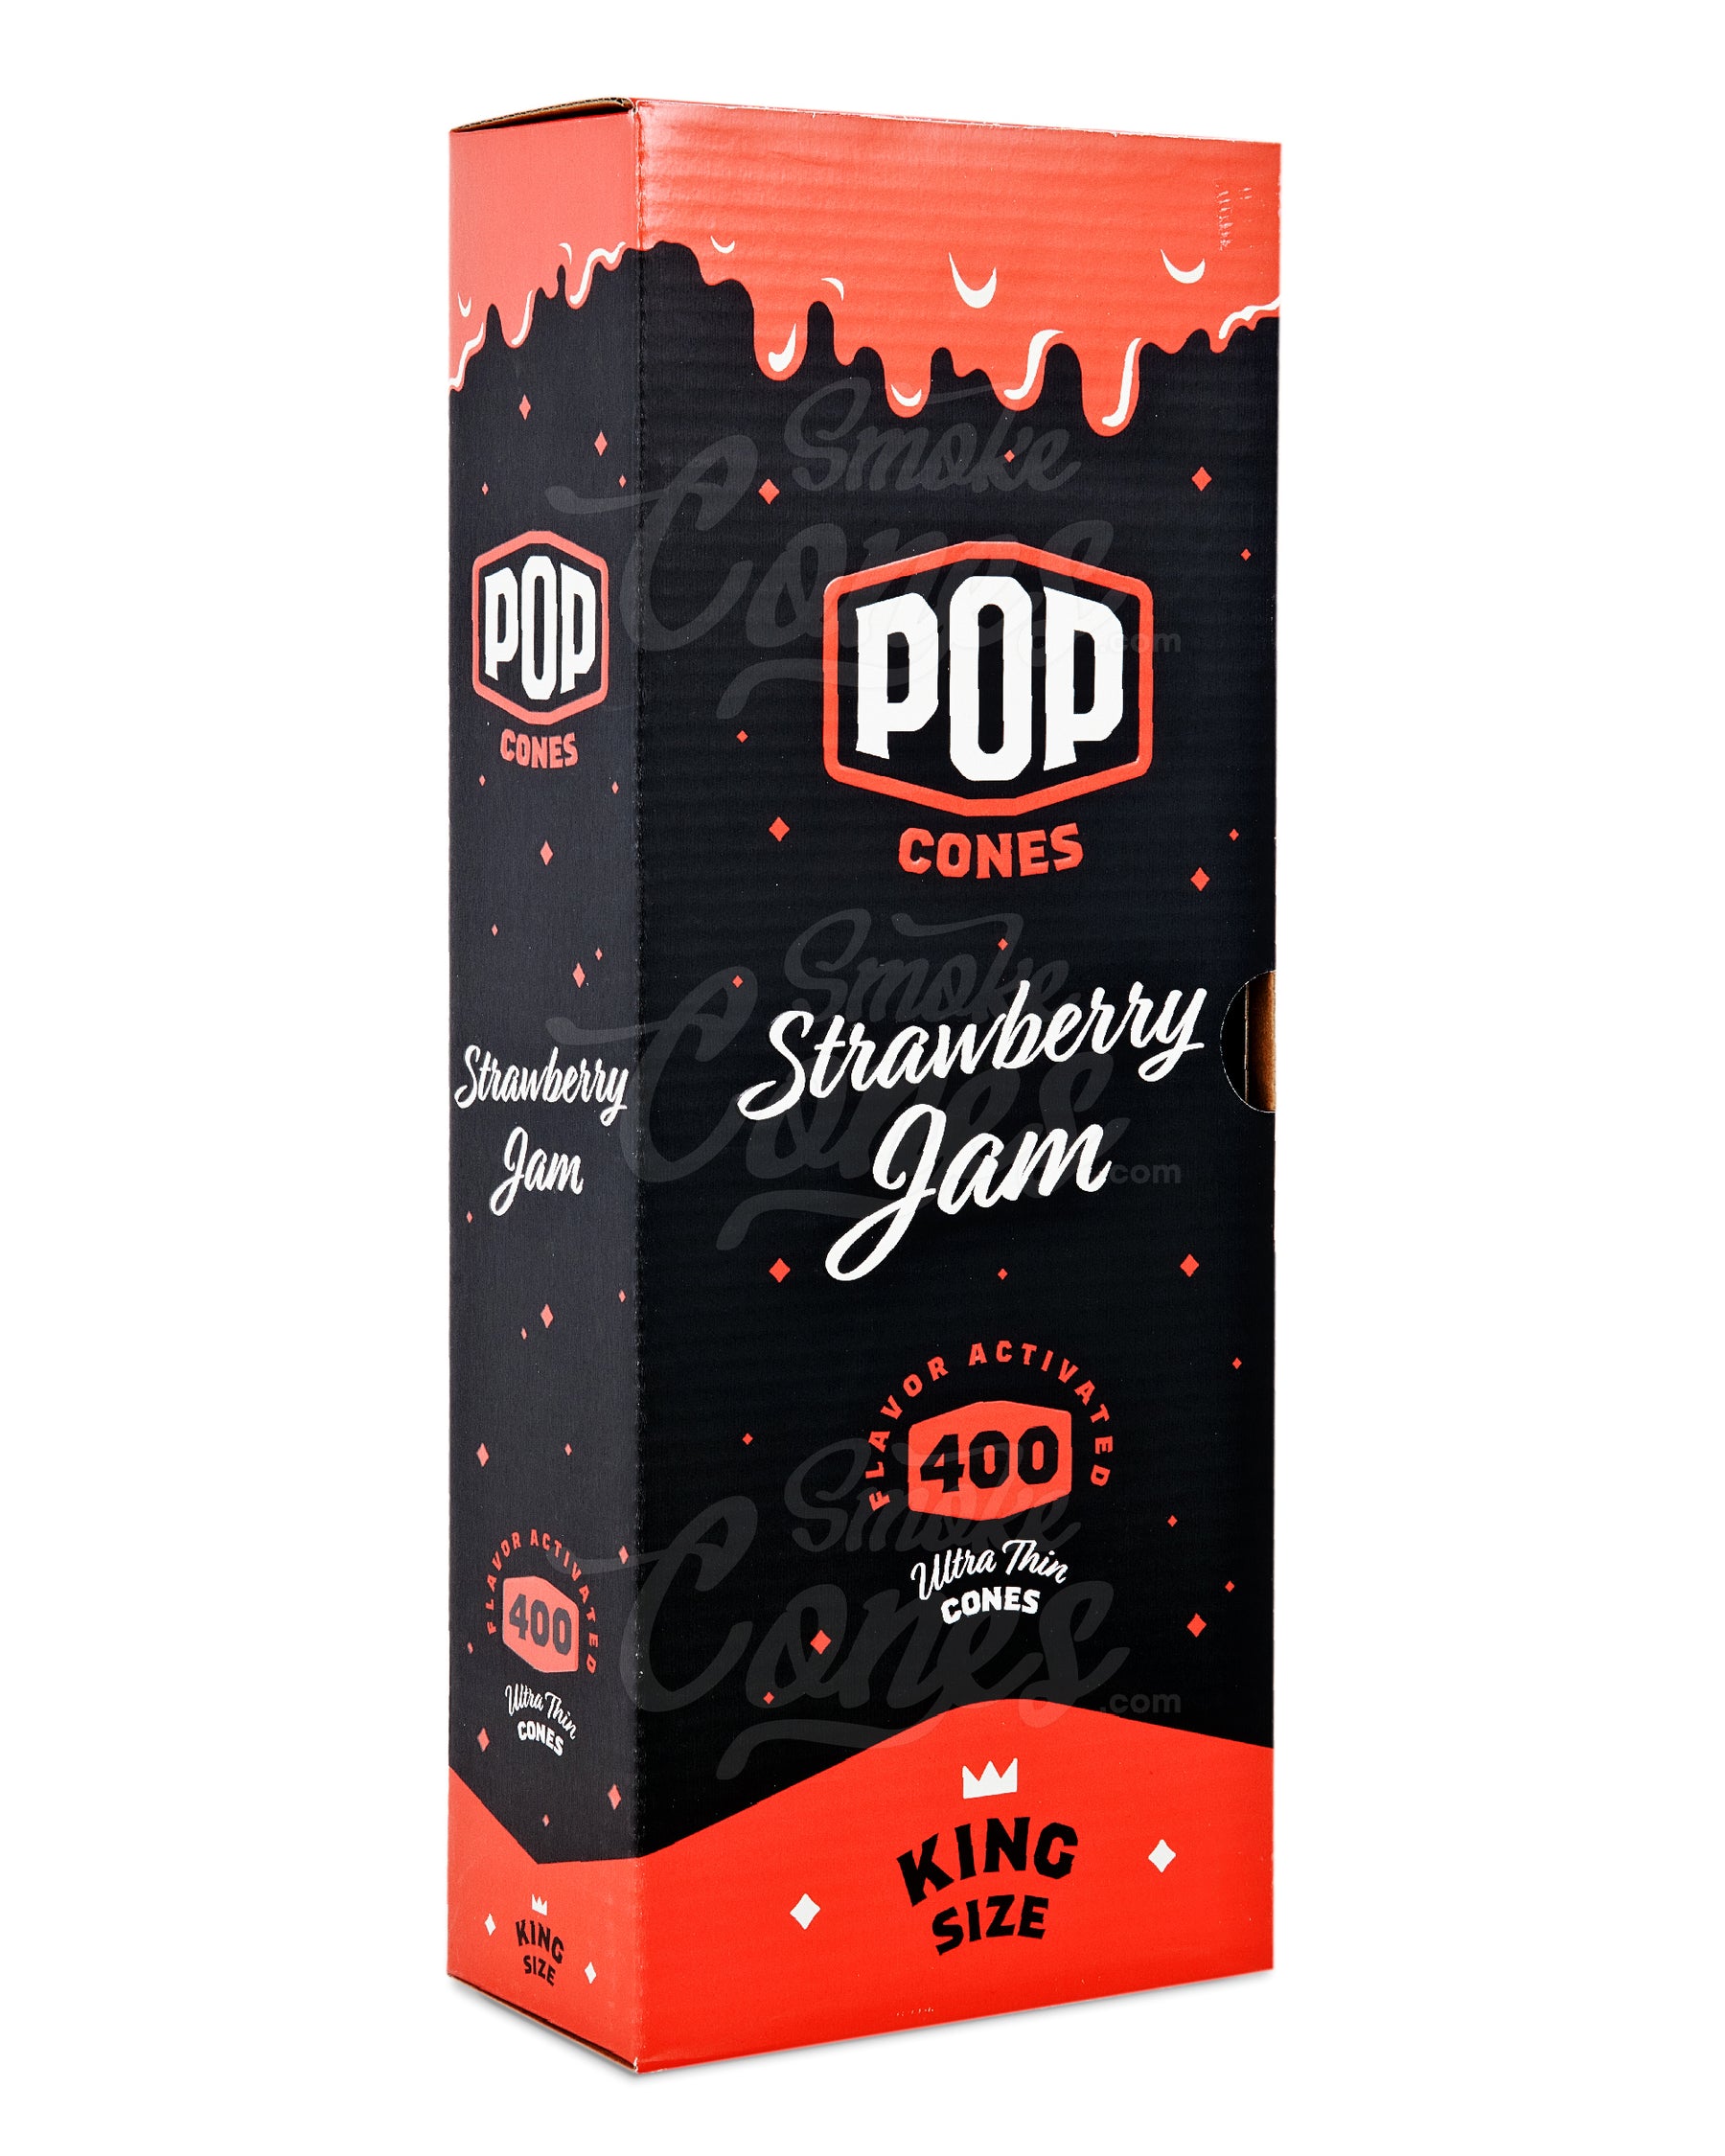 Pop Cones Strawberry Jam 109mm King Sized Unbleached Pre Rolled Cones 400/Box